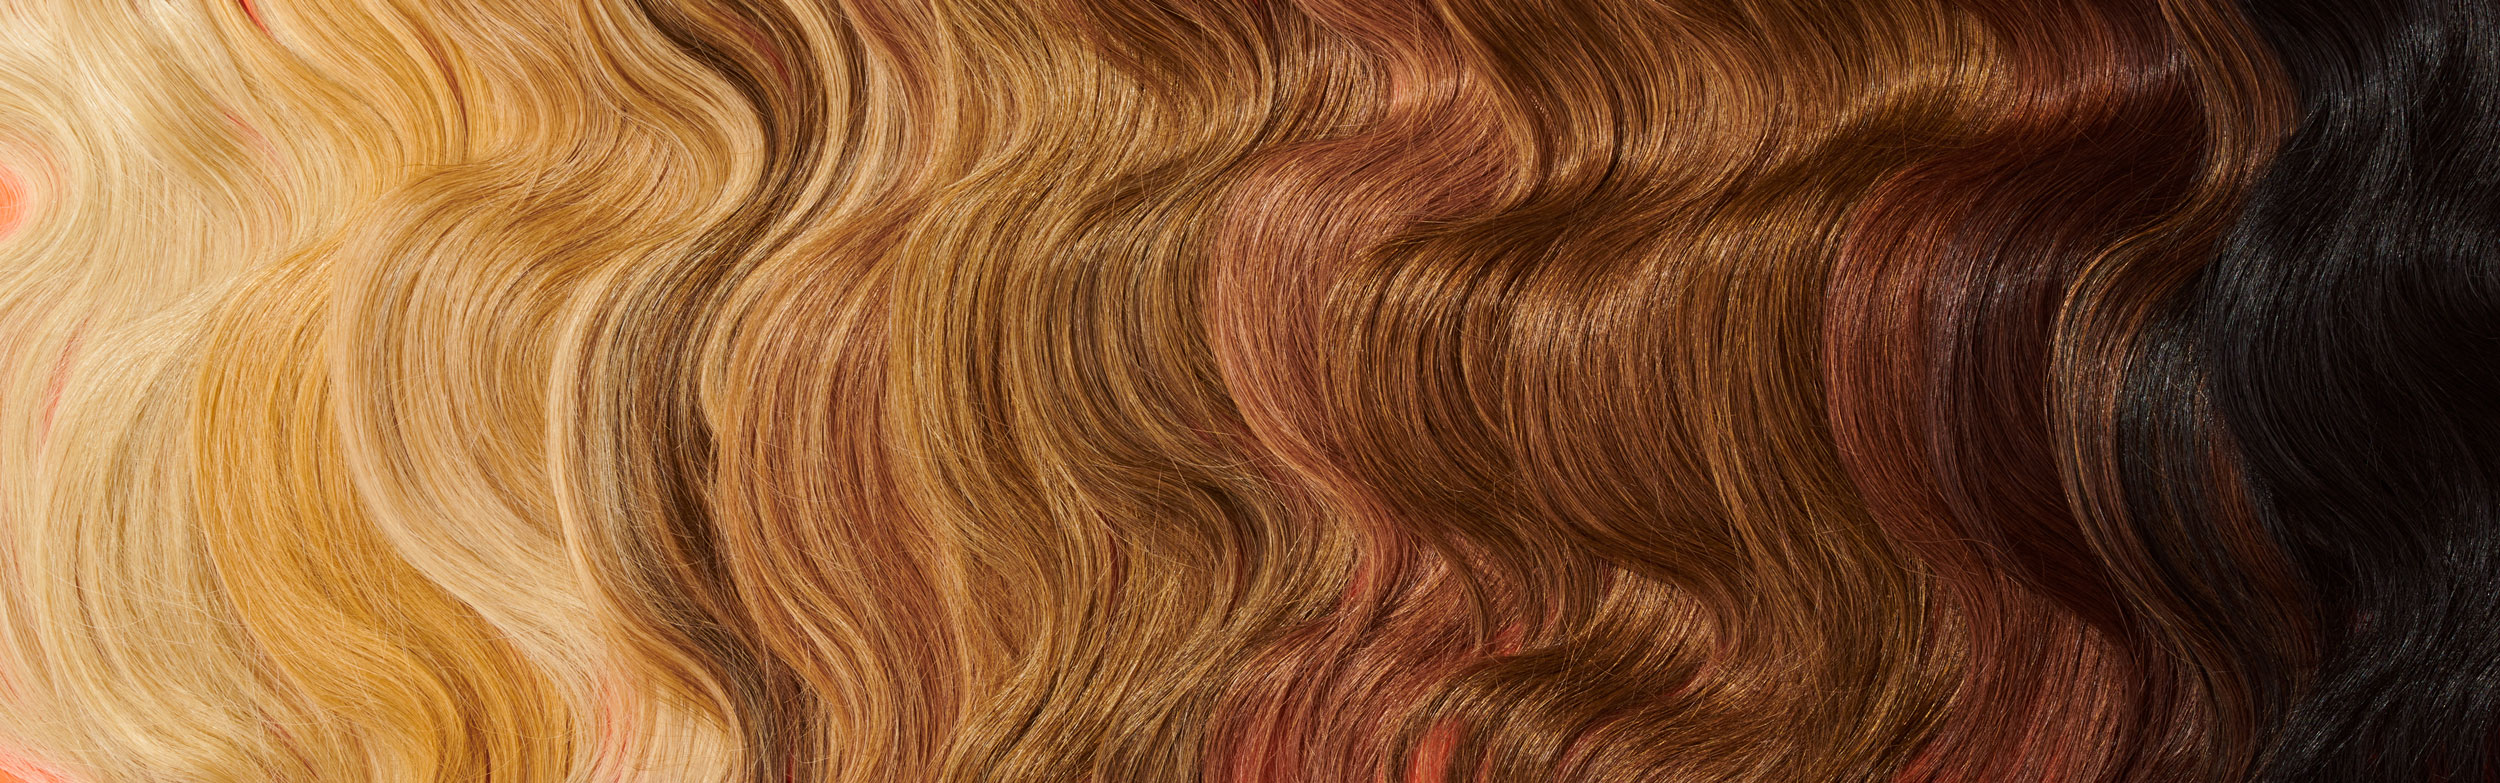 Composite image of hair extensions featuring a gradient of hair colors 